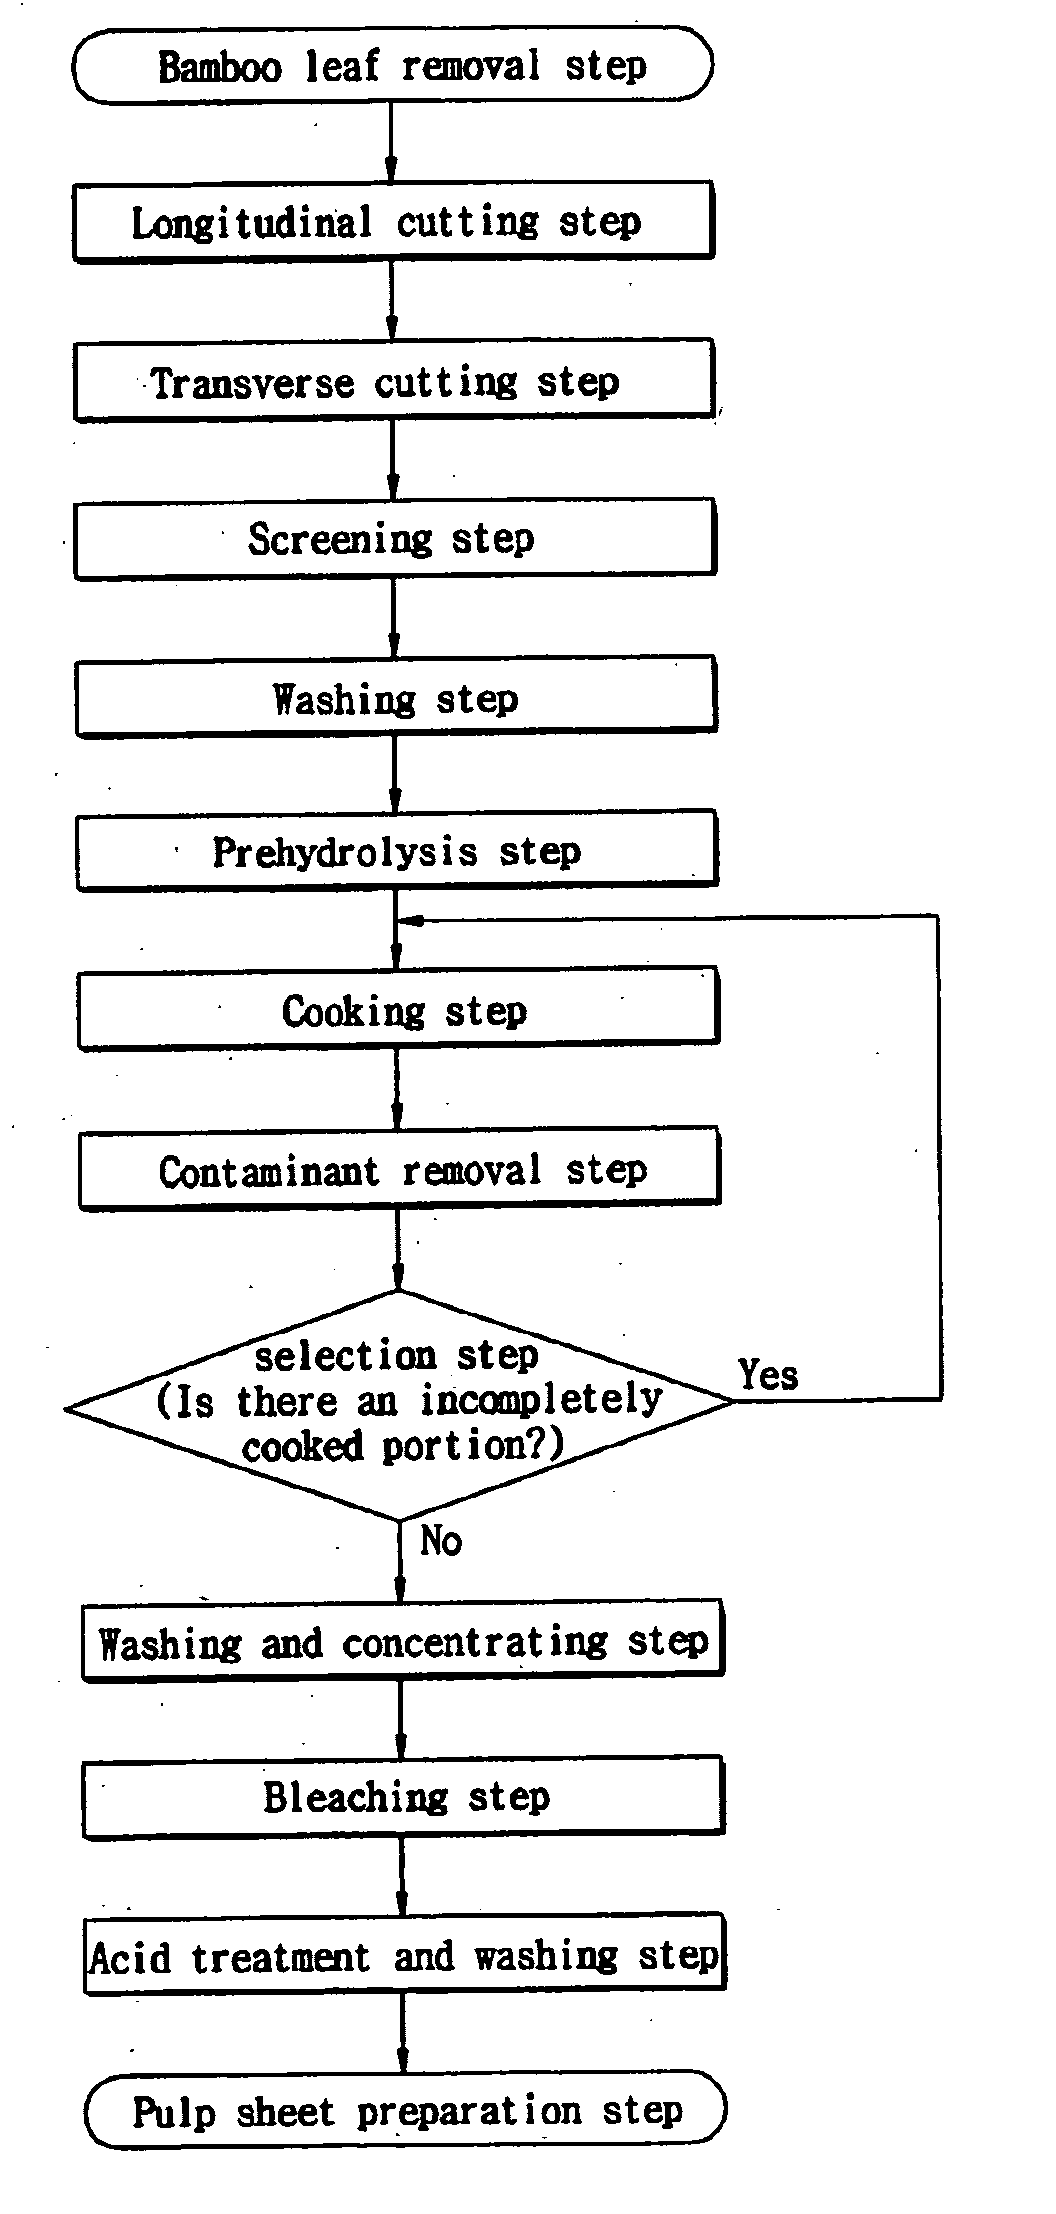 Process for Producing Fiber Pulp Utilizing Bamboo and Pulp Produced Using the Same